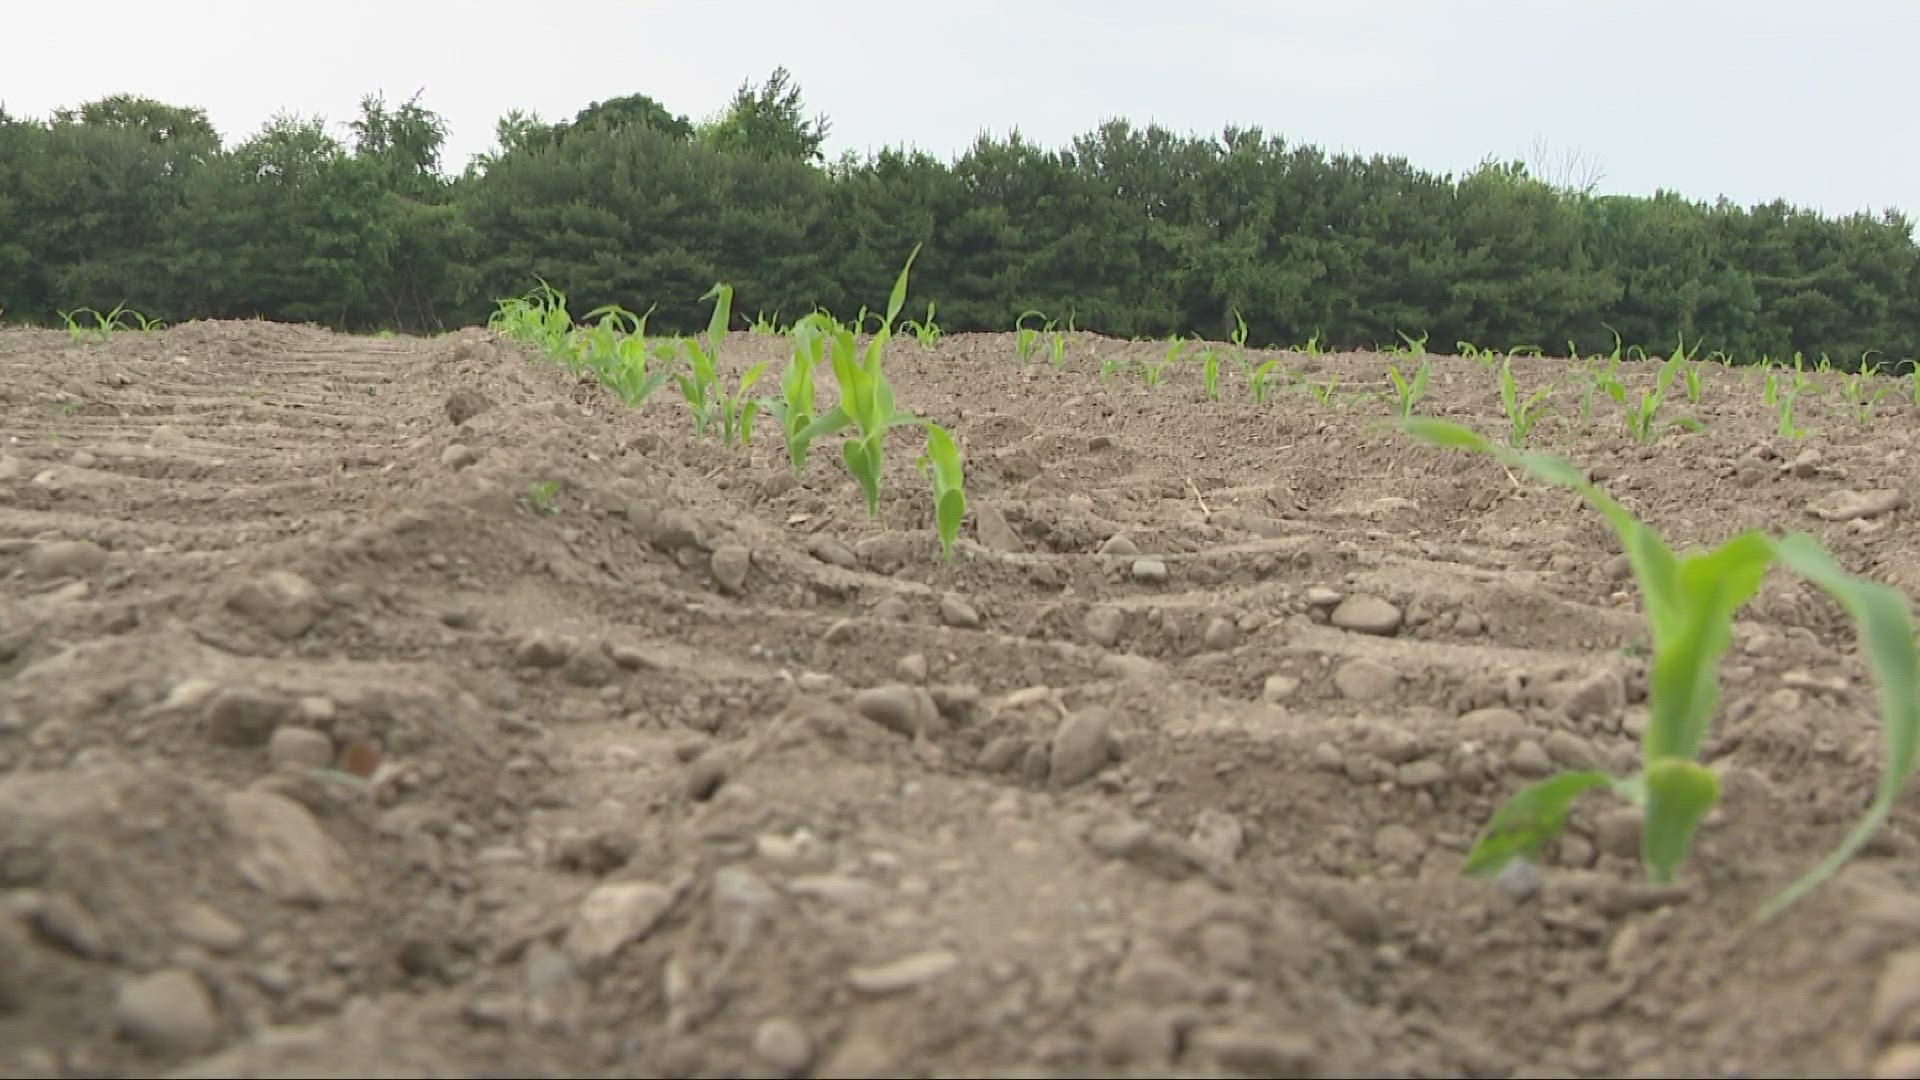 Those in the region admit their crops could be smaller due to the dry weather.